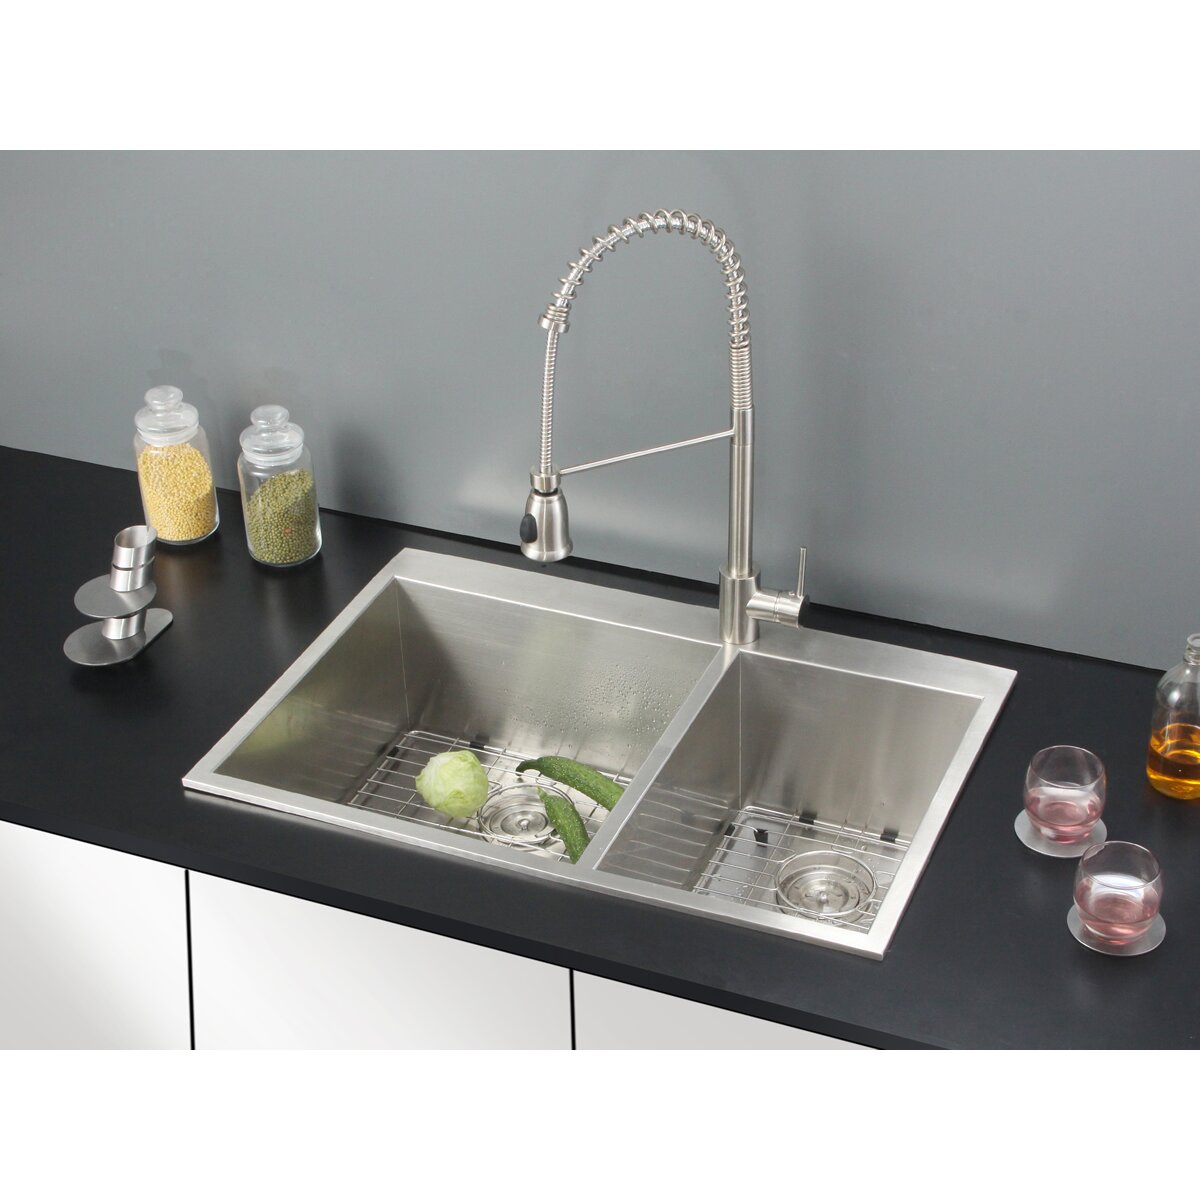 Ruvati 33" x 22" Kitchen Sink with Faucet & Reviews